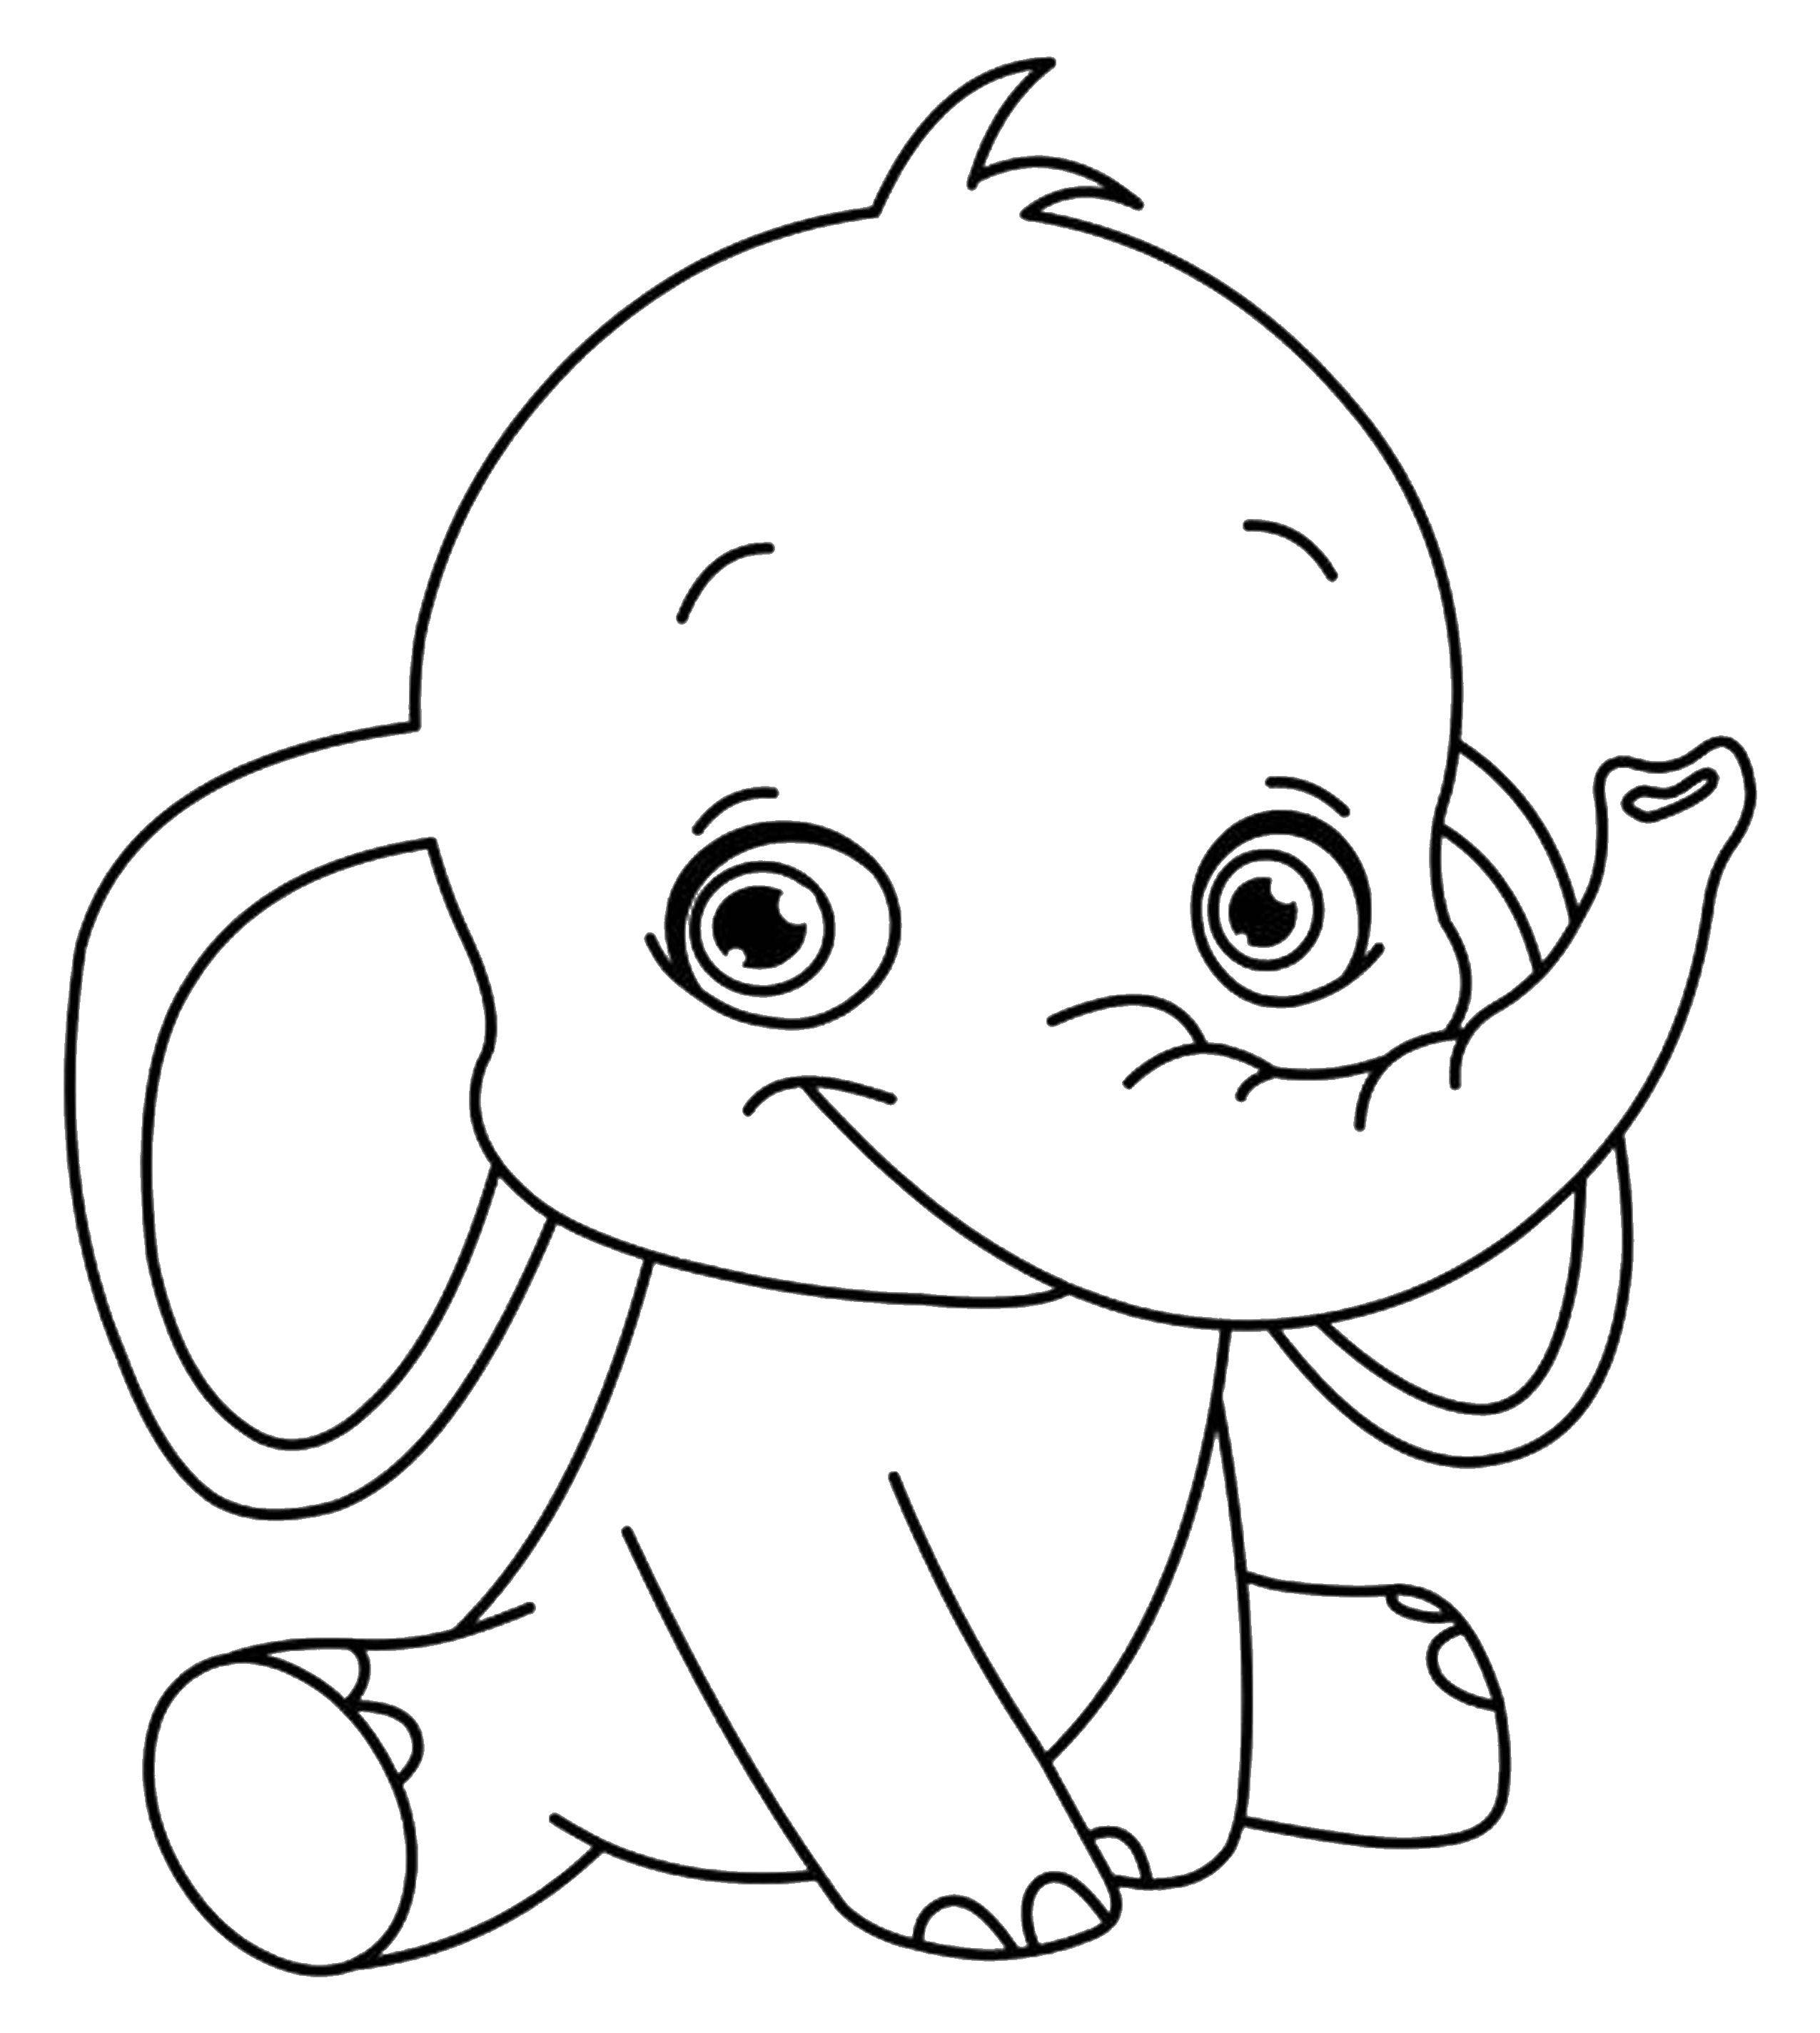 Coloring The elephant is smiling. Category Coloring pages for kids. Tags:  Animals, elephant.